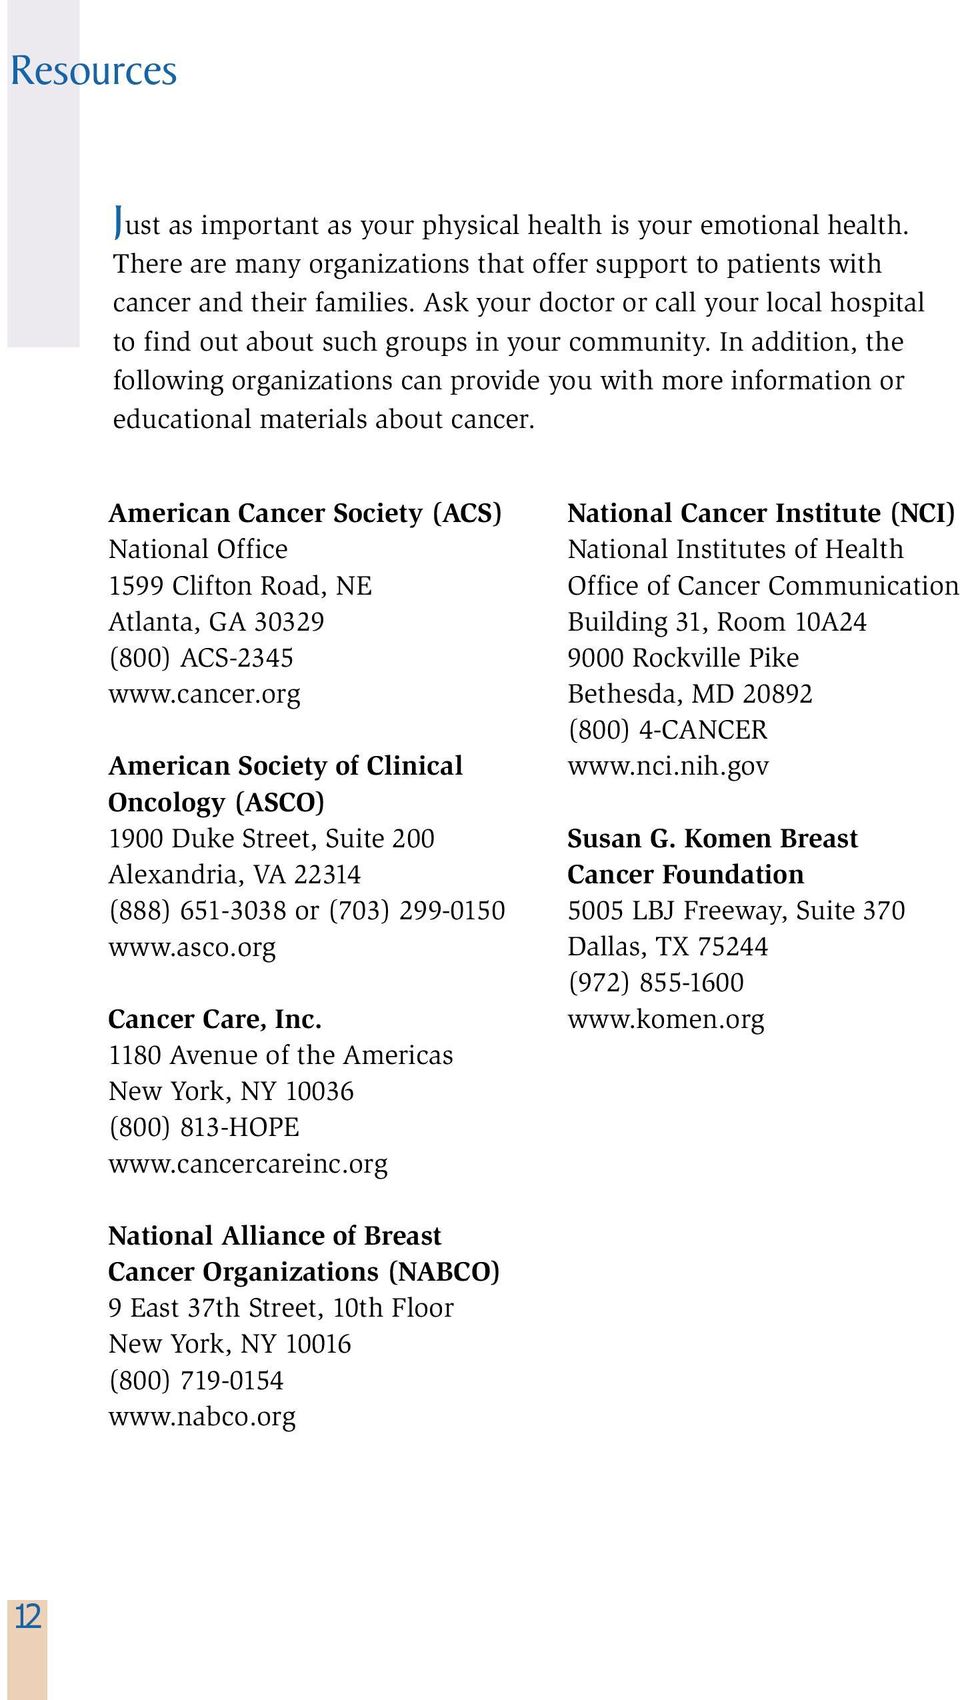 In addition, the following organizations can provide you with more information or educational materials about cancer.